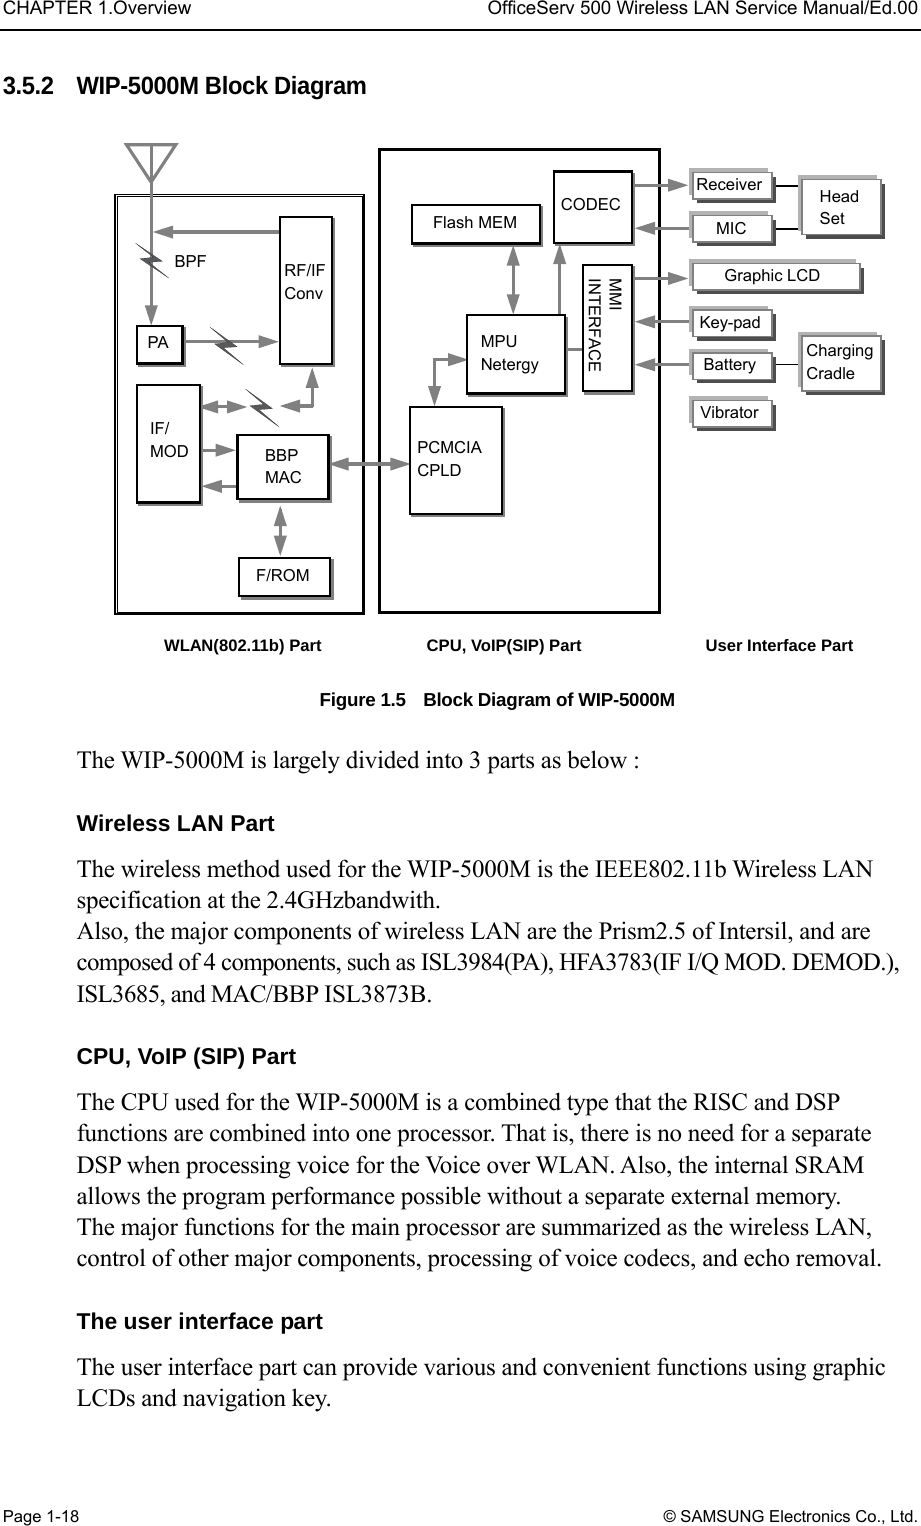 CHAPTER 1.Overview  OfficeServ 500 Wireless LAN Service Manual/Ed.00 Page 1-18 © SAMSUNG Electronics Co., Ltd. 3.5.2    WIP-5000M Block Diagram Figure 1.5    Block Diagram of WIP-5000M  The WIP-5000M is largely divided into 3 parts as below :  Wireless LAN Part The wireless method used for the WIP-5000M is the IEEE802.11b Wireless LAN specification at the 2.4GHzbandwith.   Also, the major components of wireless LAN are the Prism2.5 of Intersil, and are composed of 4 components, such as ISL3984(PA), HFA3783(IF I/Q MOD. DEMOD.), ISL3685, and MAC/BBP ISL3873B.  CPU, VoIP (SIP) Part The CPU used for the WIP-5000M is a combined type that the RISC and DSP functions are combined into one processor. That is, there is no need for a separate DSP when processing voice for the Voice over WLAN. Also, the internal SRAM allows the program performance possible without a separate external memory. The major functions for the main processor are summarized as the wireless LAN, control of other major components, processing of voice codecs, and echo removal.        The user interface part The user interface part can provide various and convenient functions using graphic LCDs and navigation key. BPF PA IF/ MOD  BBP MAC RF/IF Conv F/ROM PCMCIACPLD MPU NetergyFlash MEMCODECMMI INTERFACE Receiver MIC Graphic LCD Key-pad Battery Vibrator Charging Cradle Head Set WLAN(802.11b) Part  CPU, VoIP(SIP) Part  User Interface Part 